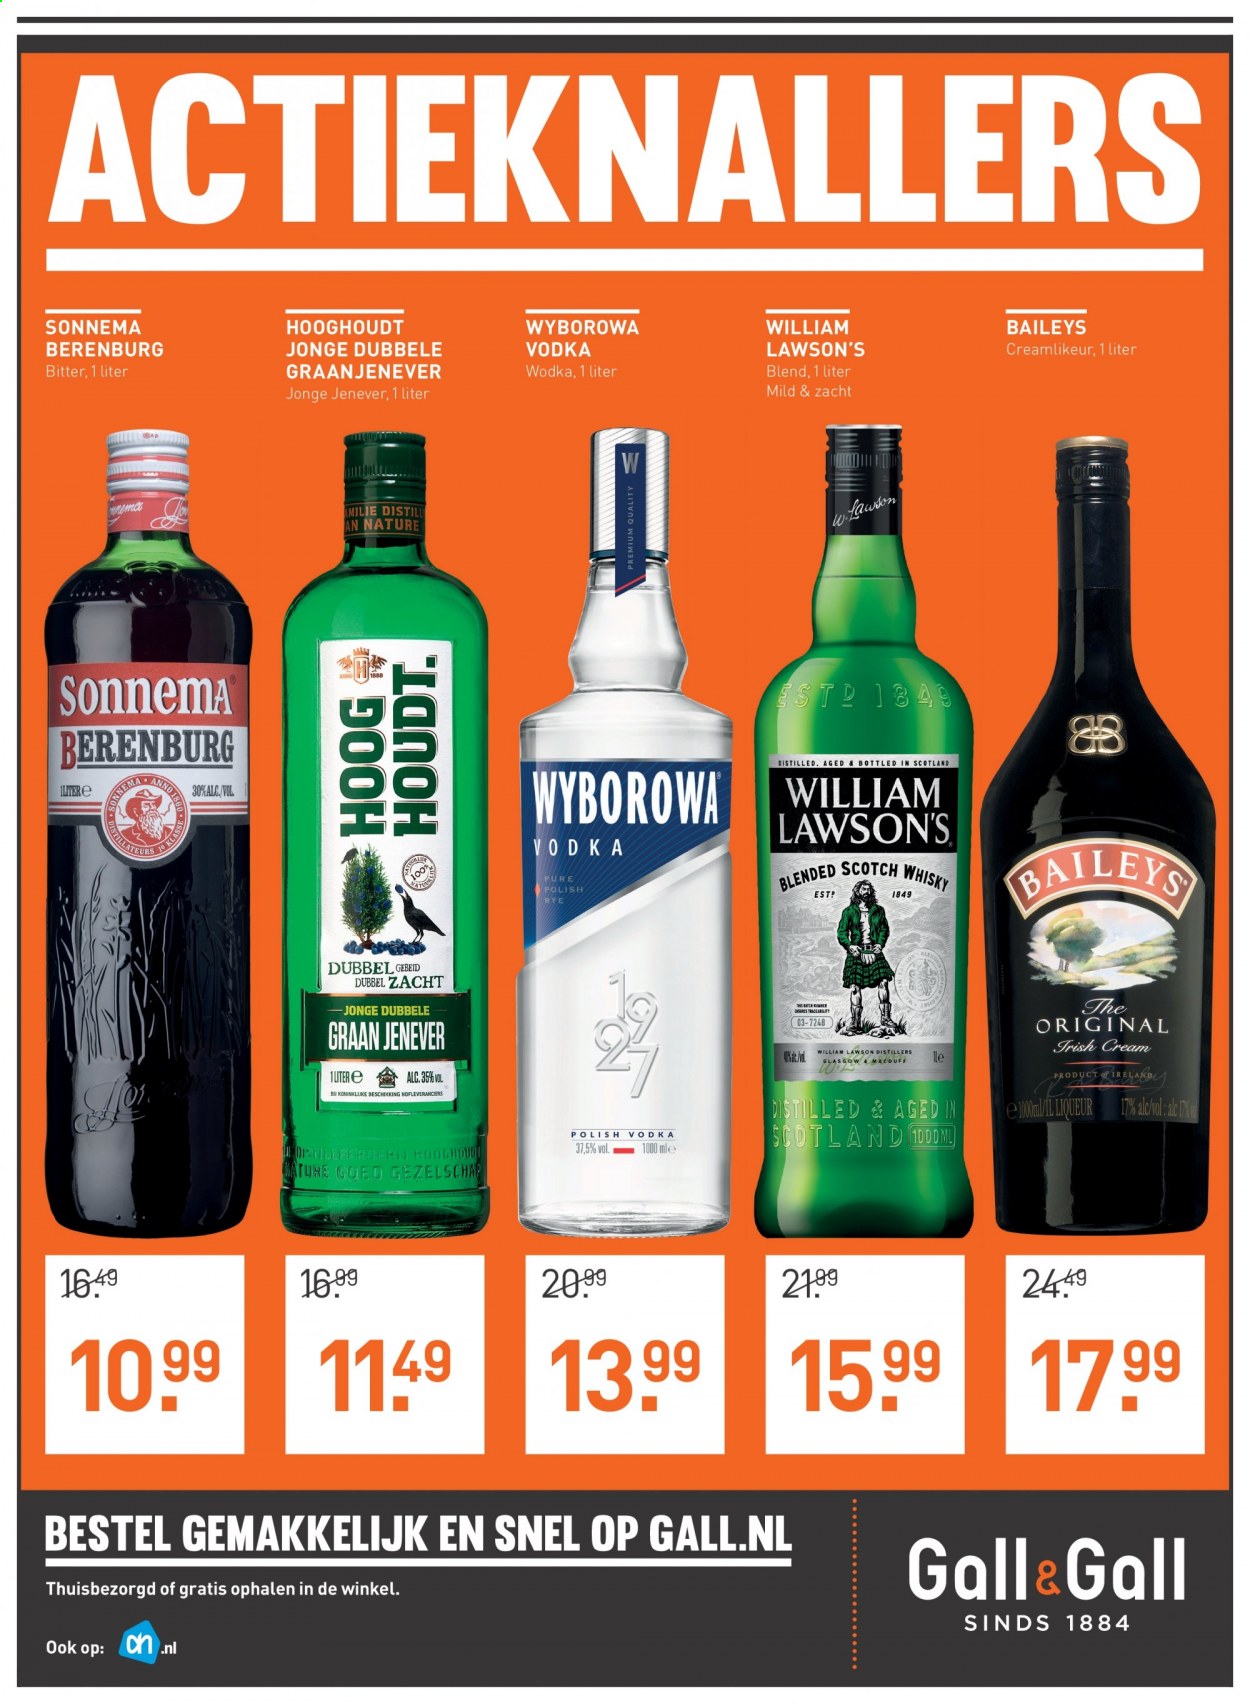 thumbnail - Gall & Gall-aanbieding - 1-3-2021 - 14-3-2021 -  producten in de aanbieding - blended scotch whisky, liqueur, scotch whisky, whisky, Hooghoudt, Jenever, Baileys, William Lawson's. Pagina 8.